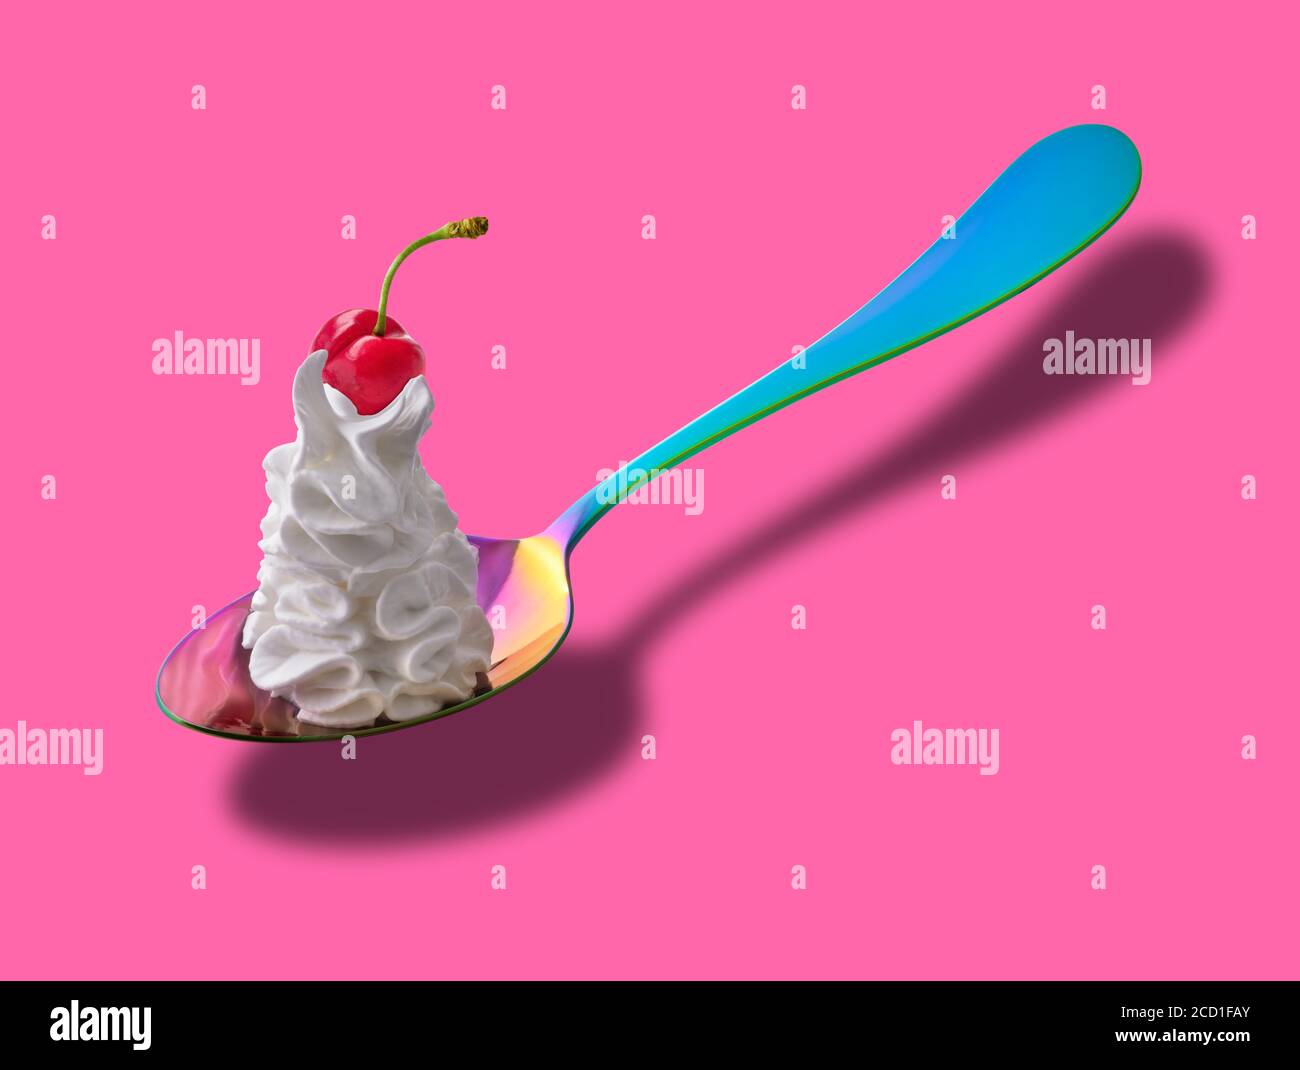 Colorful spoon with whipped cream and a cherry on top Stock Photo